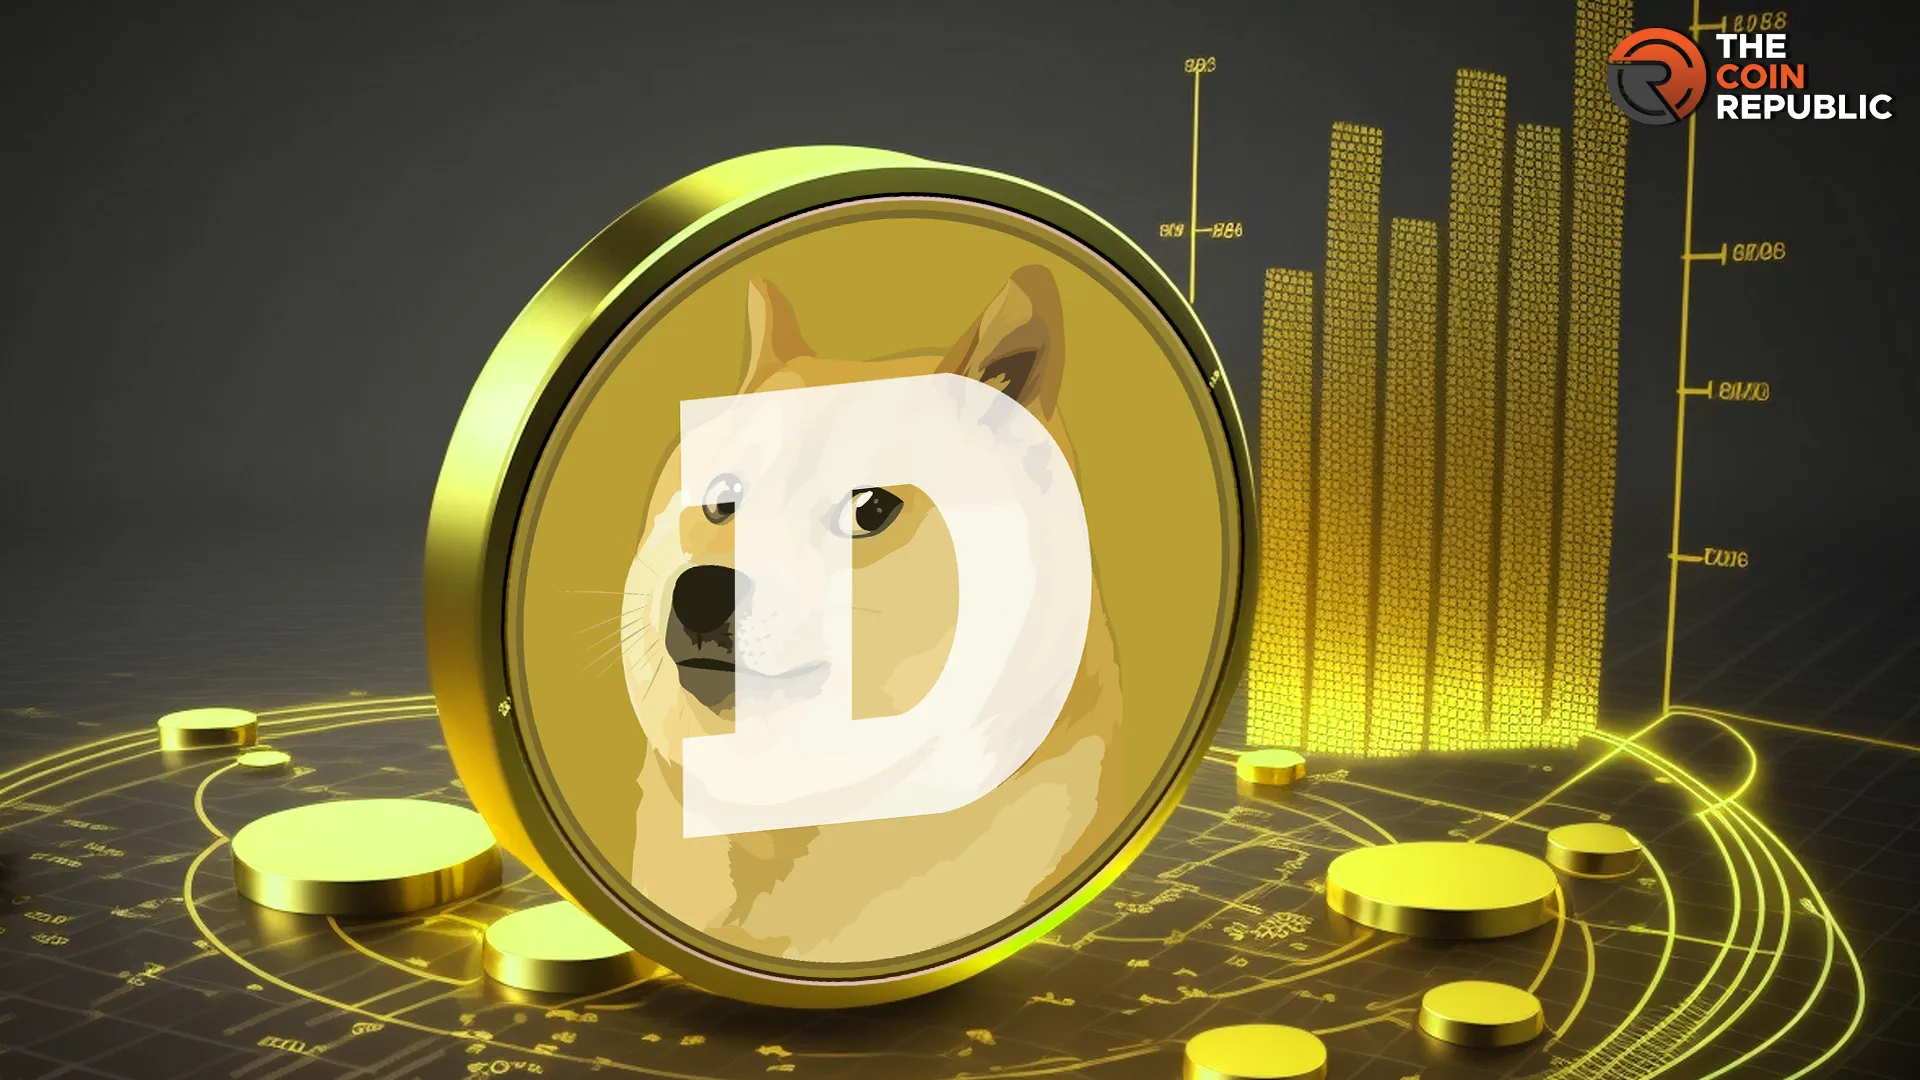 DOGE Price to See a Massive 2600% Jump in the Next Bull Cycle, Top Crypto Analyst Predicts